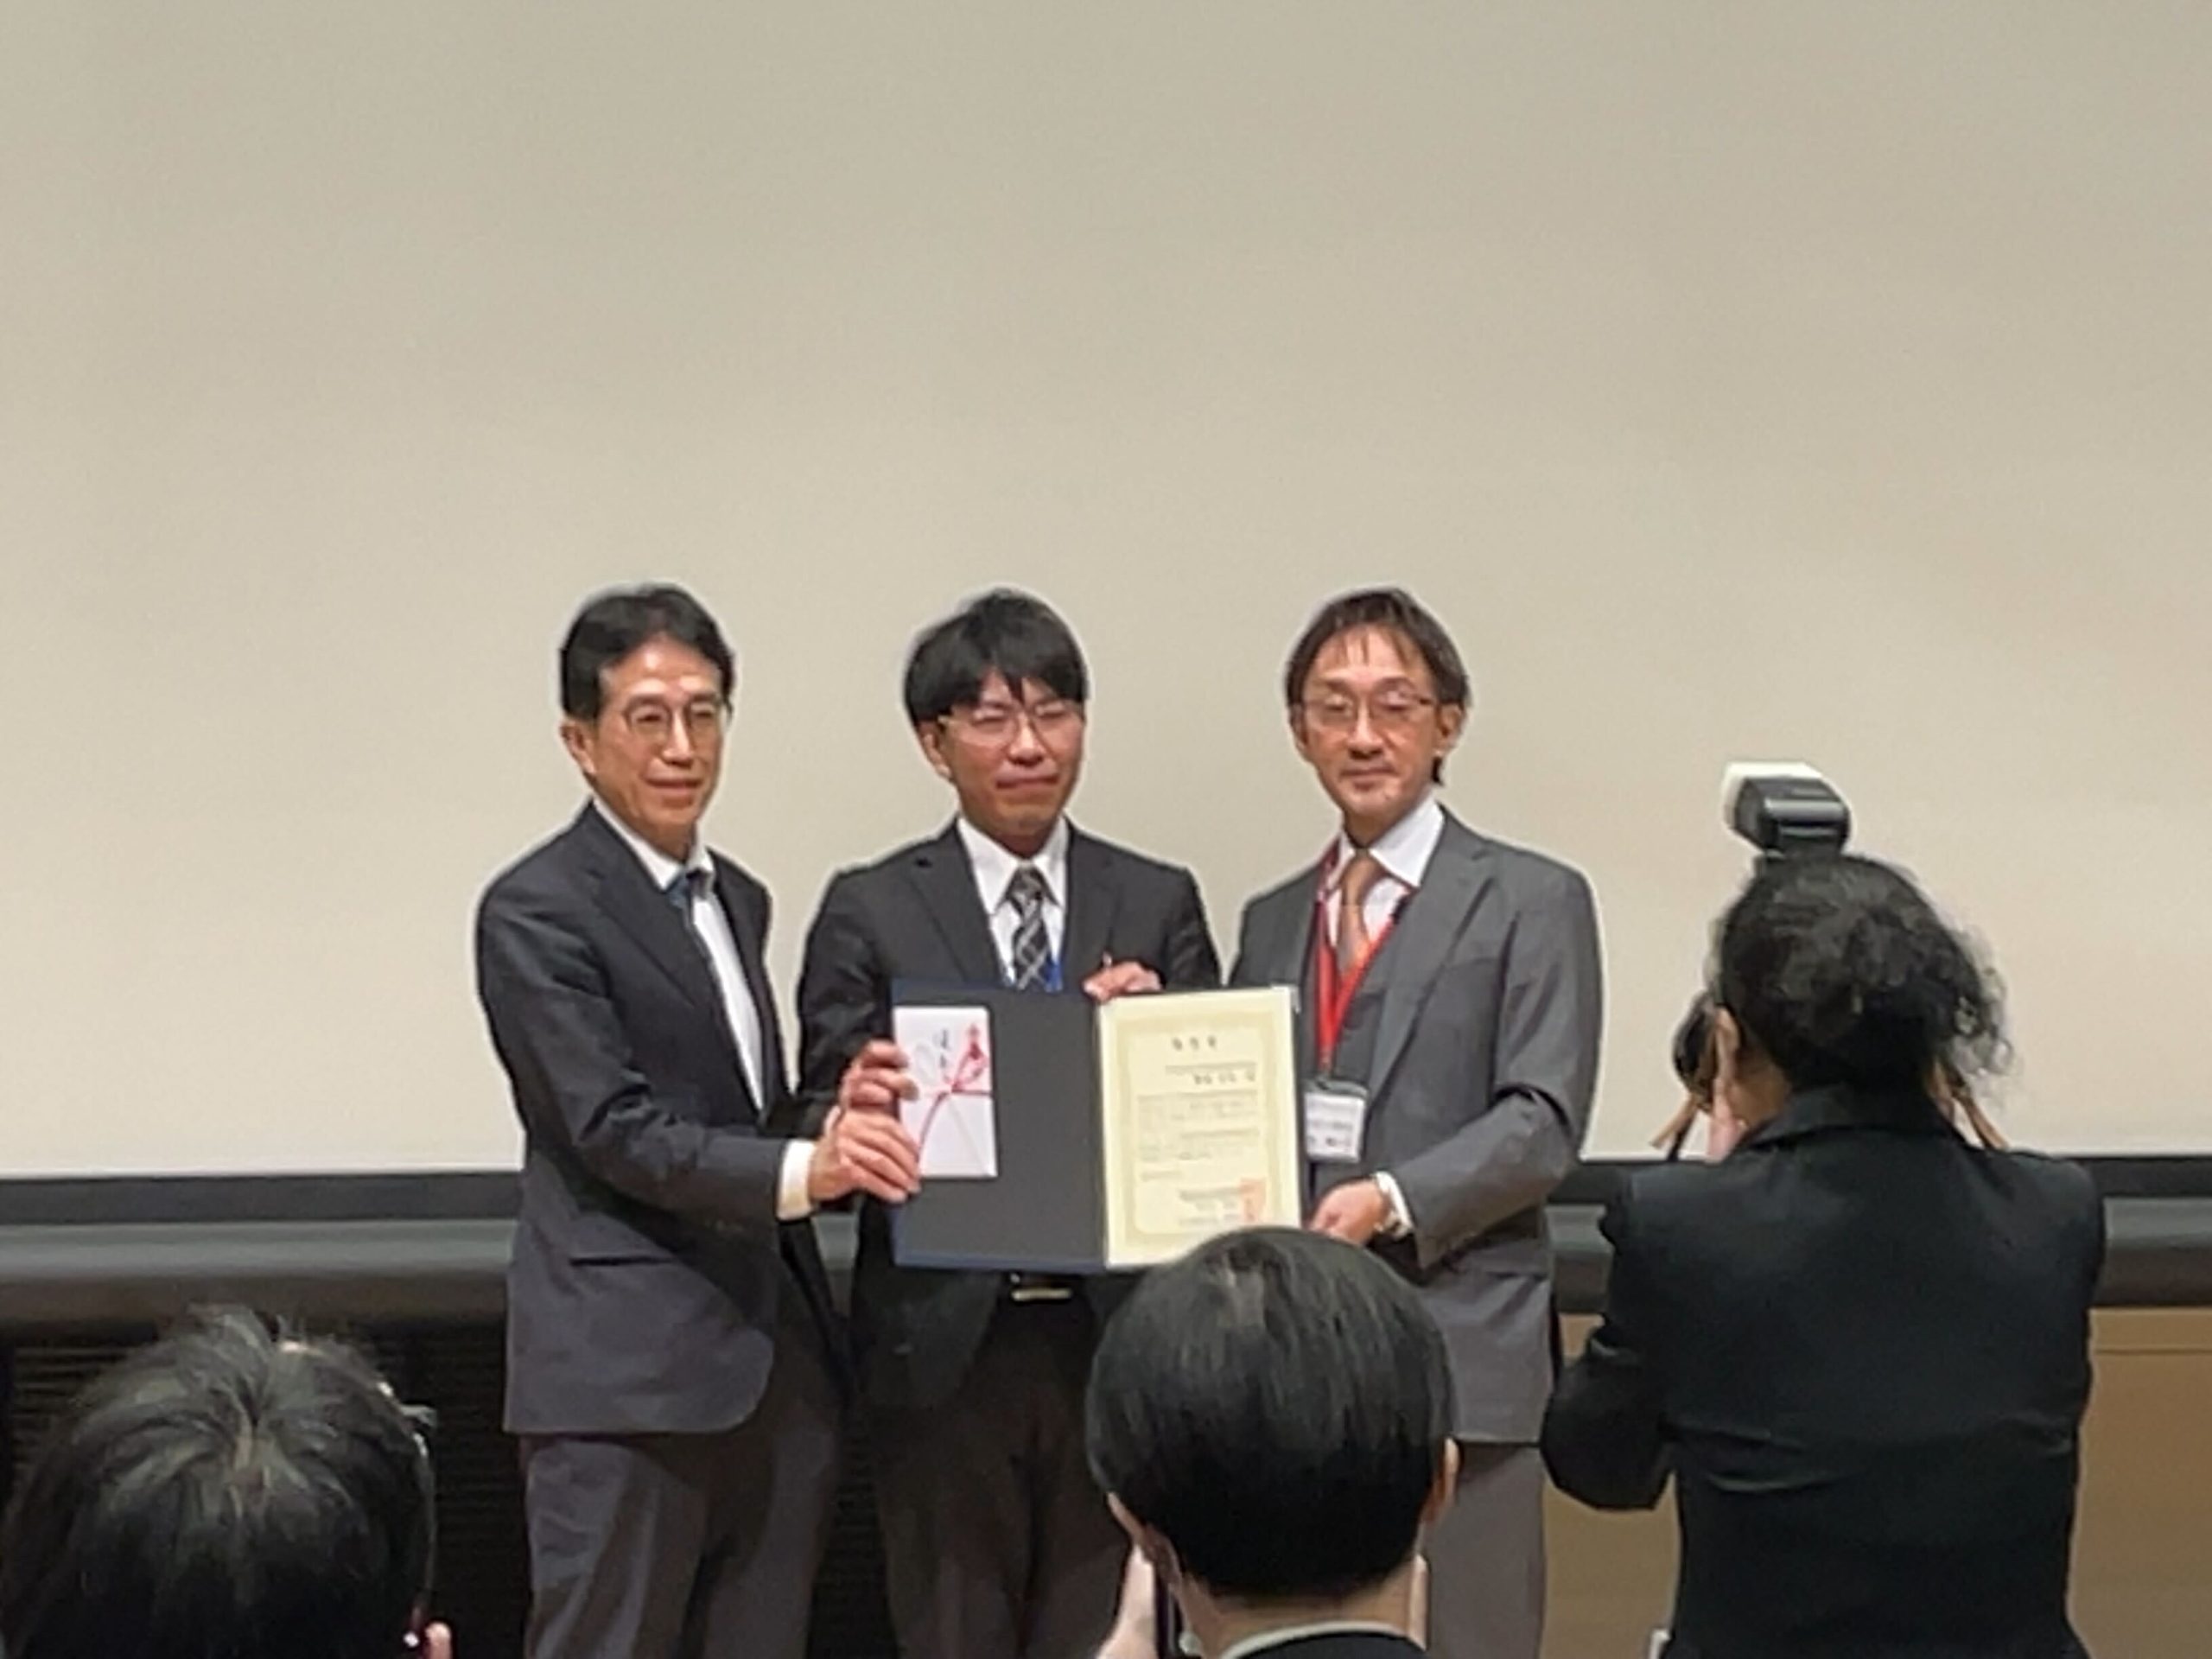 University of Yamanashi undergoing demonstration experiment: Received the Excellence Award at the 37th High Precision Radiation External Irradiation Subcommittee Academic Conference of the Japanese Society of Radiation Oncology!